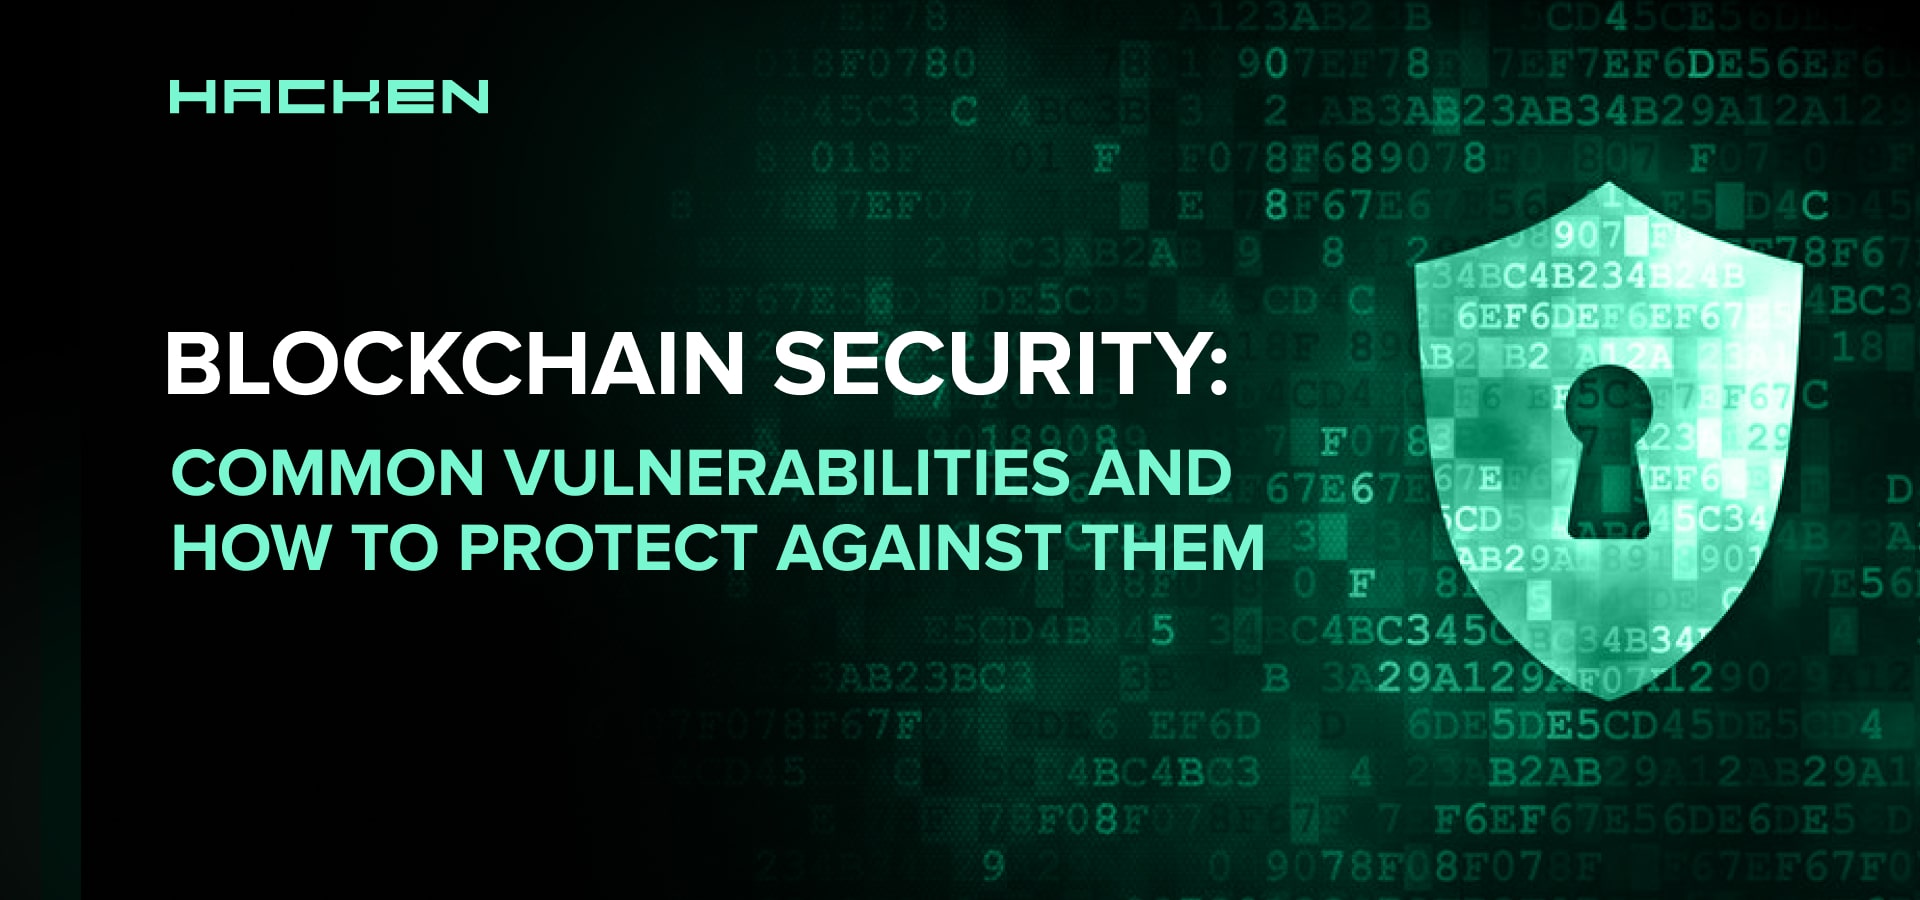 Blockchain Security Vulnerabilities and How to Protect Against Them